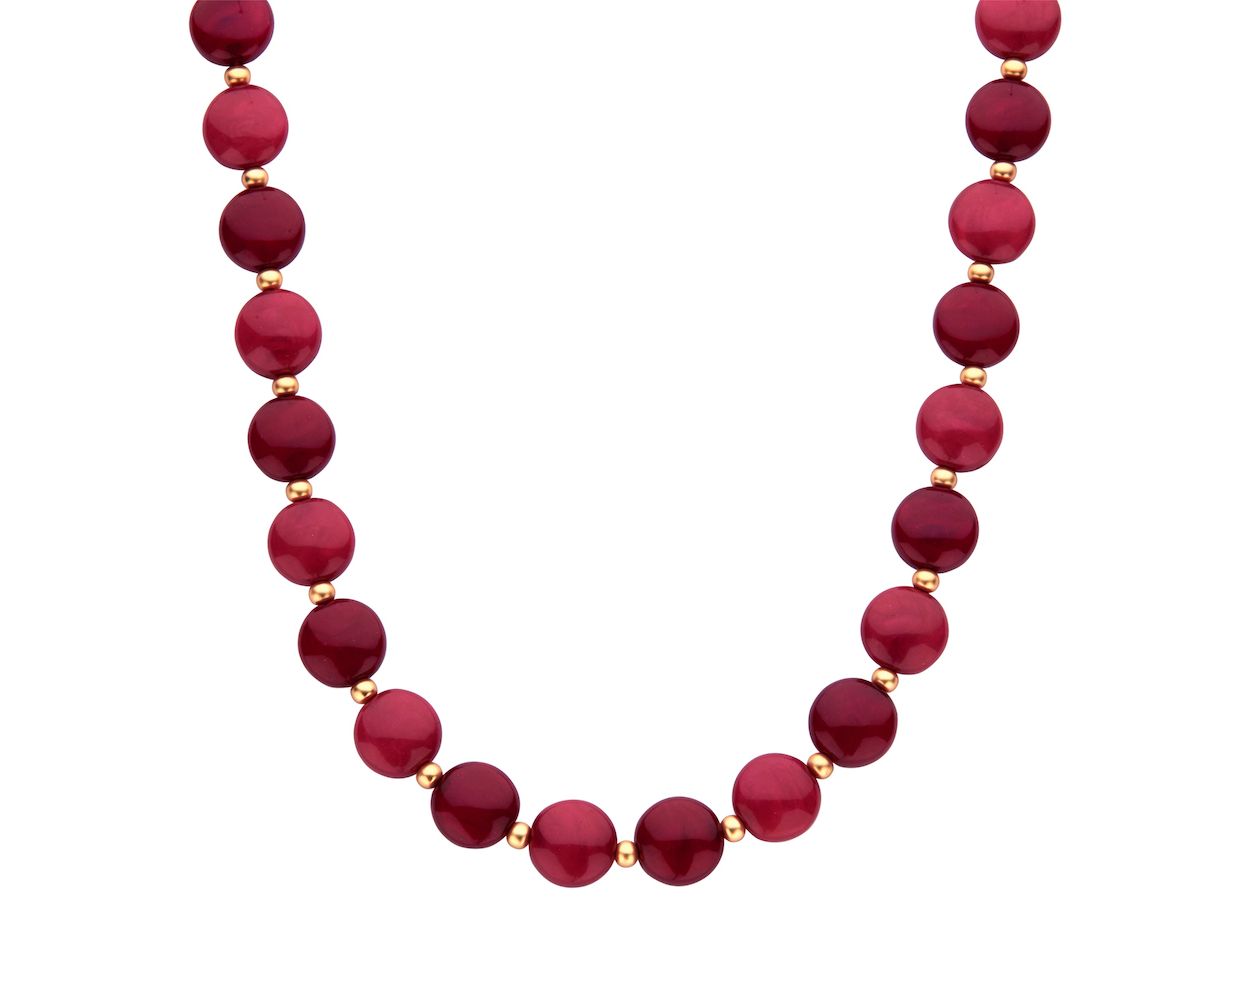 Biba ketting Lustrous Pieces Red - 61370